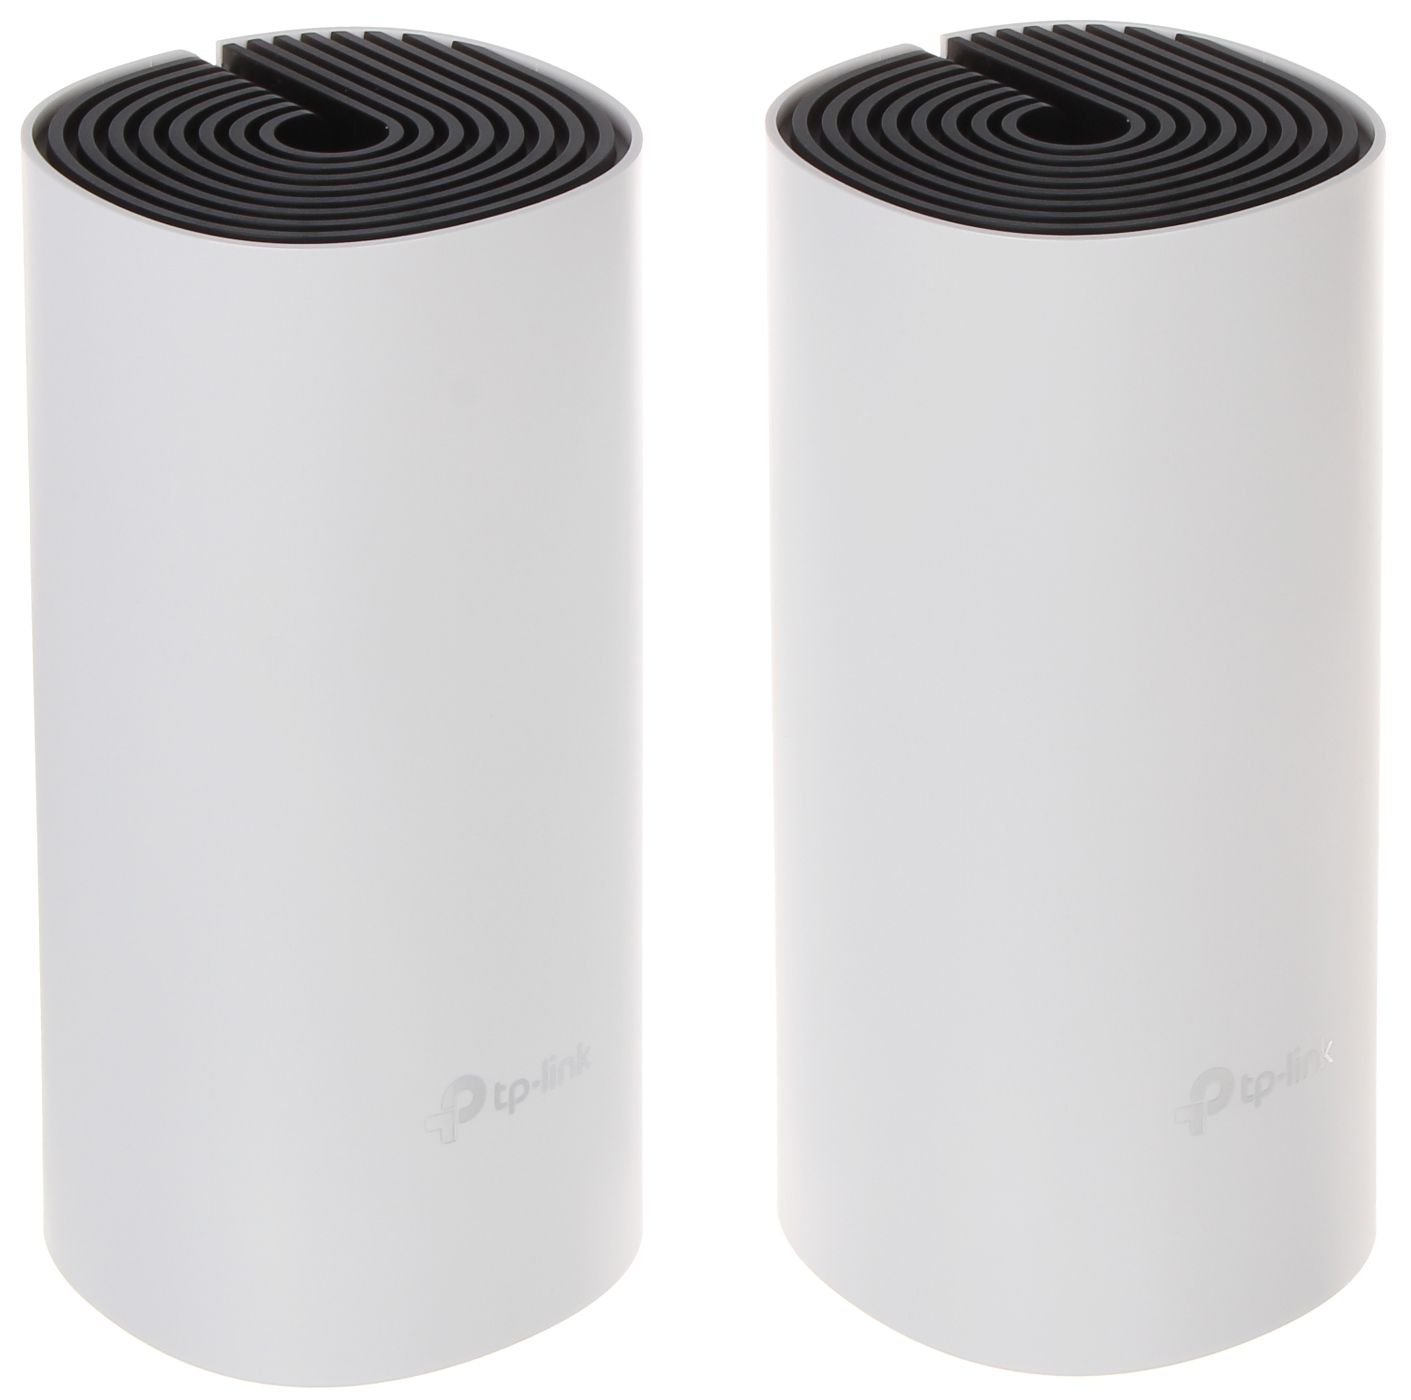 WHOLE HOME WI-FI SYSTEM DECO-M4(2-PACK) 2.4 GHz, 5 GHz... - Internal - Delta